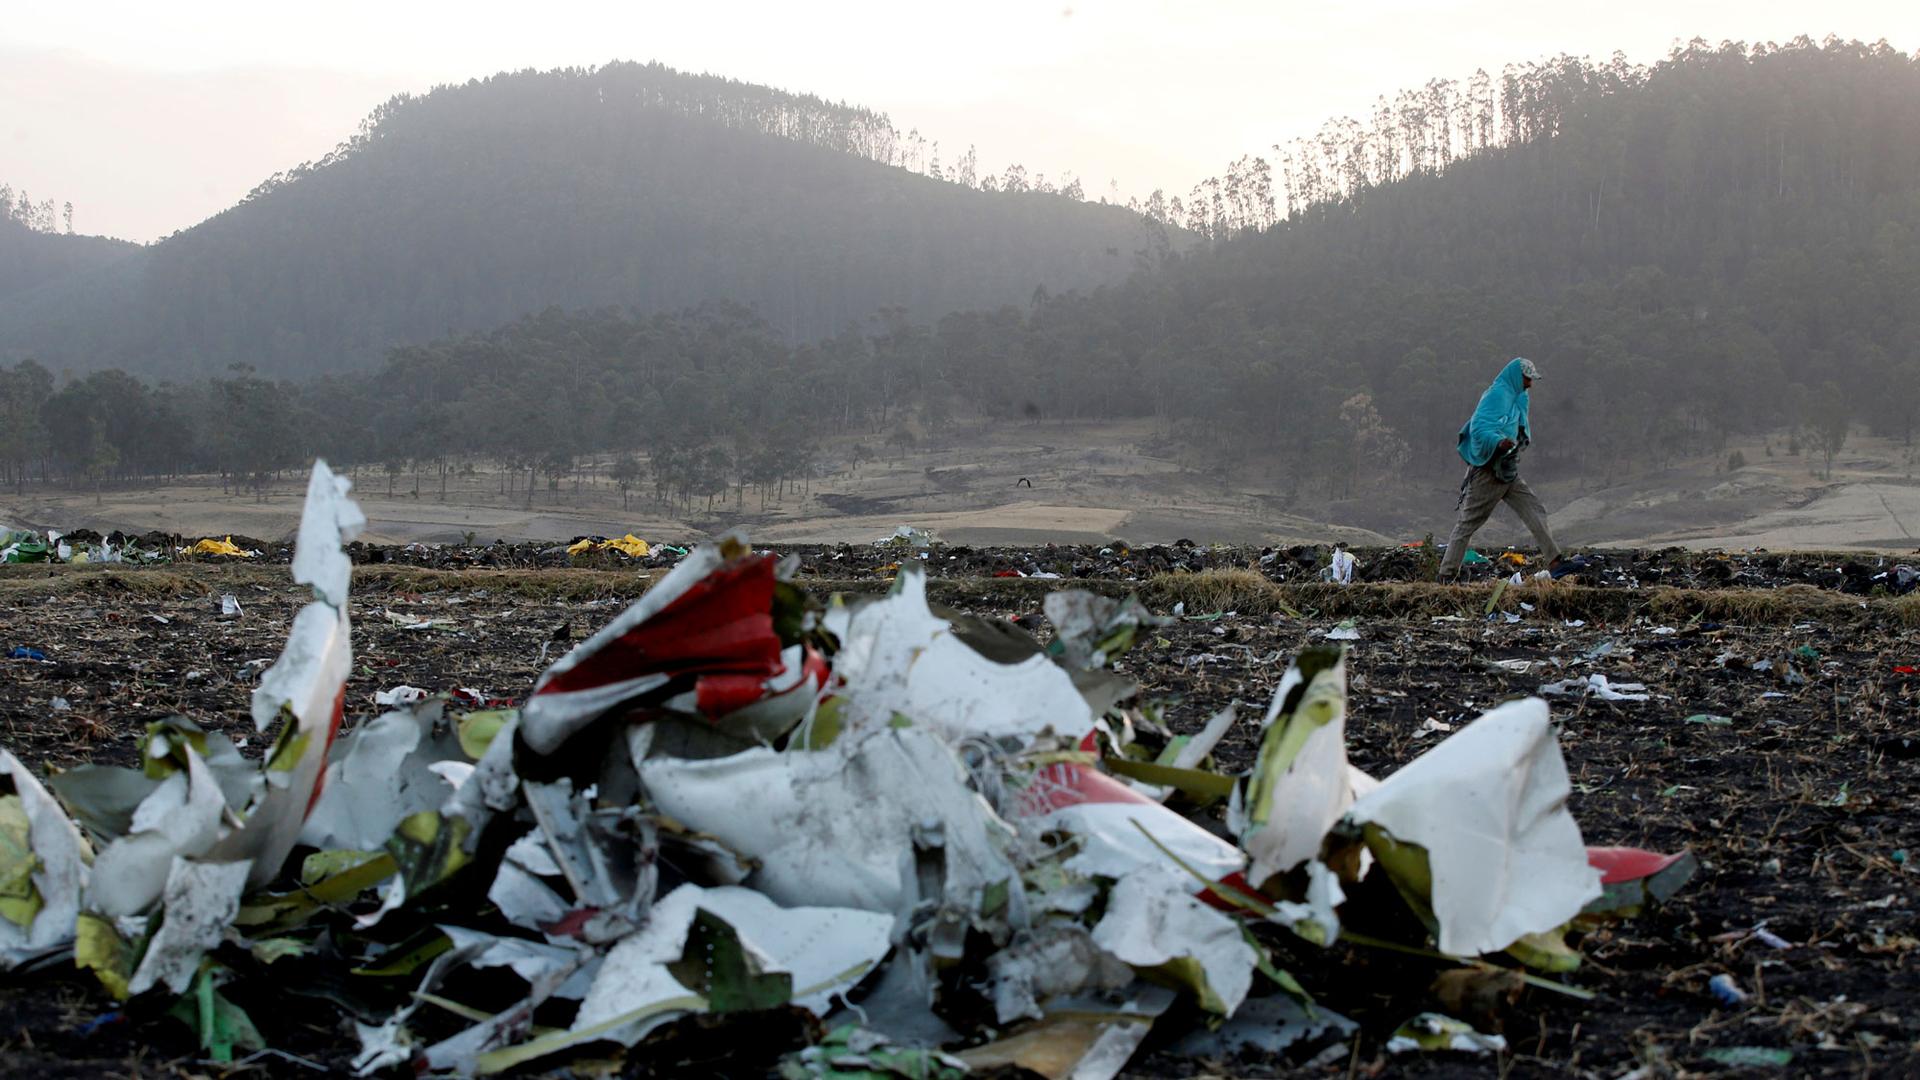 Debris from the Ethiopian Airlines Flight ET 302 plane crash is seen in the near ground of the photo with a man walking past in the background.